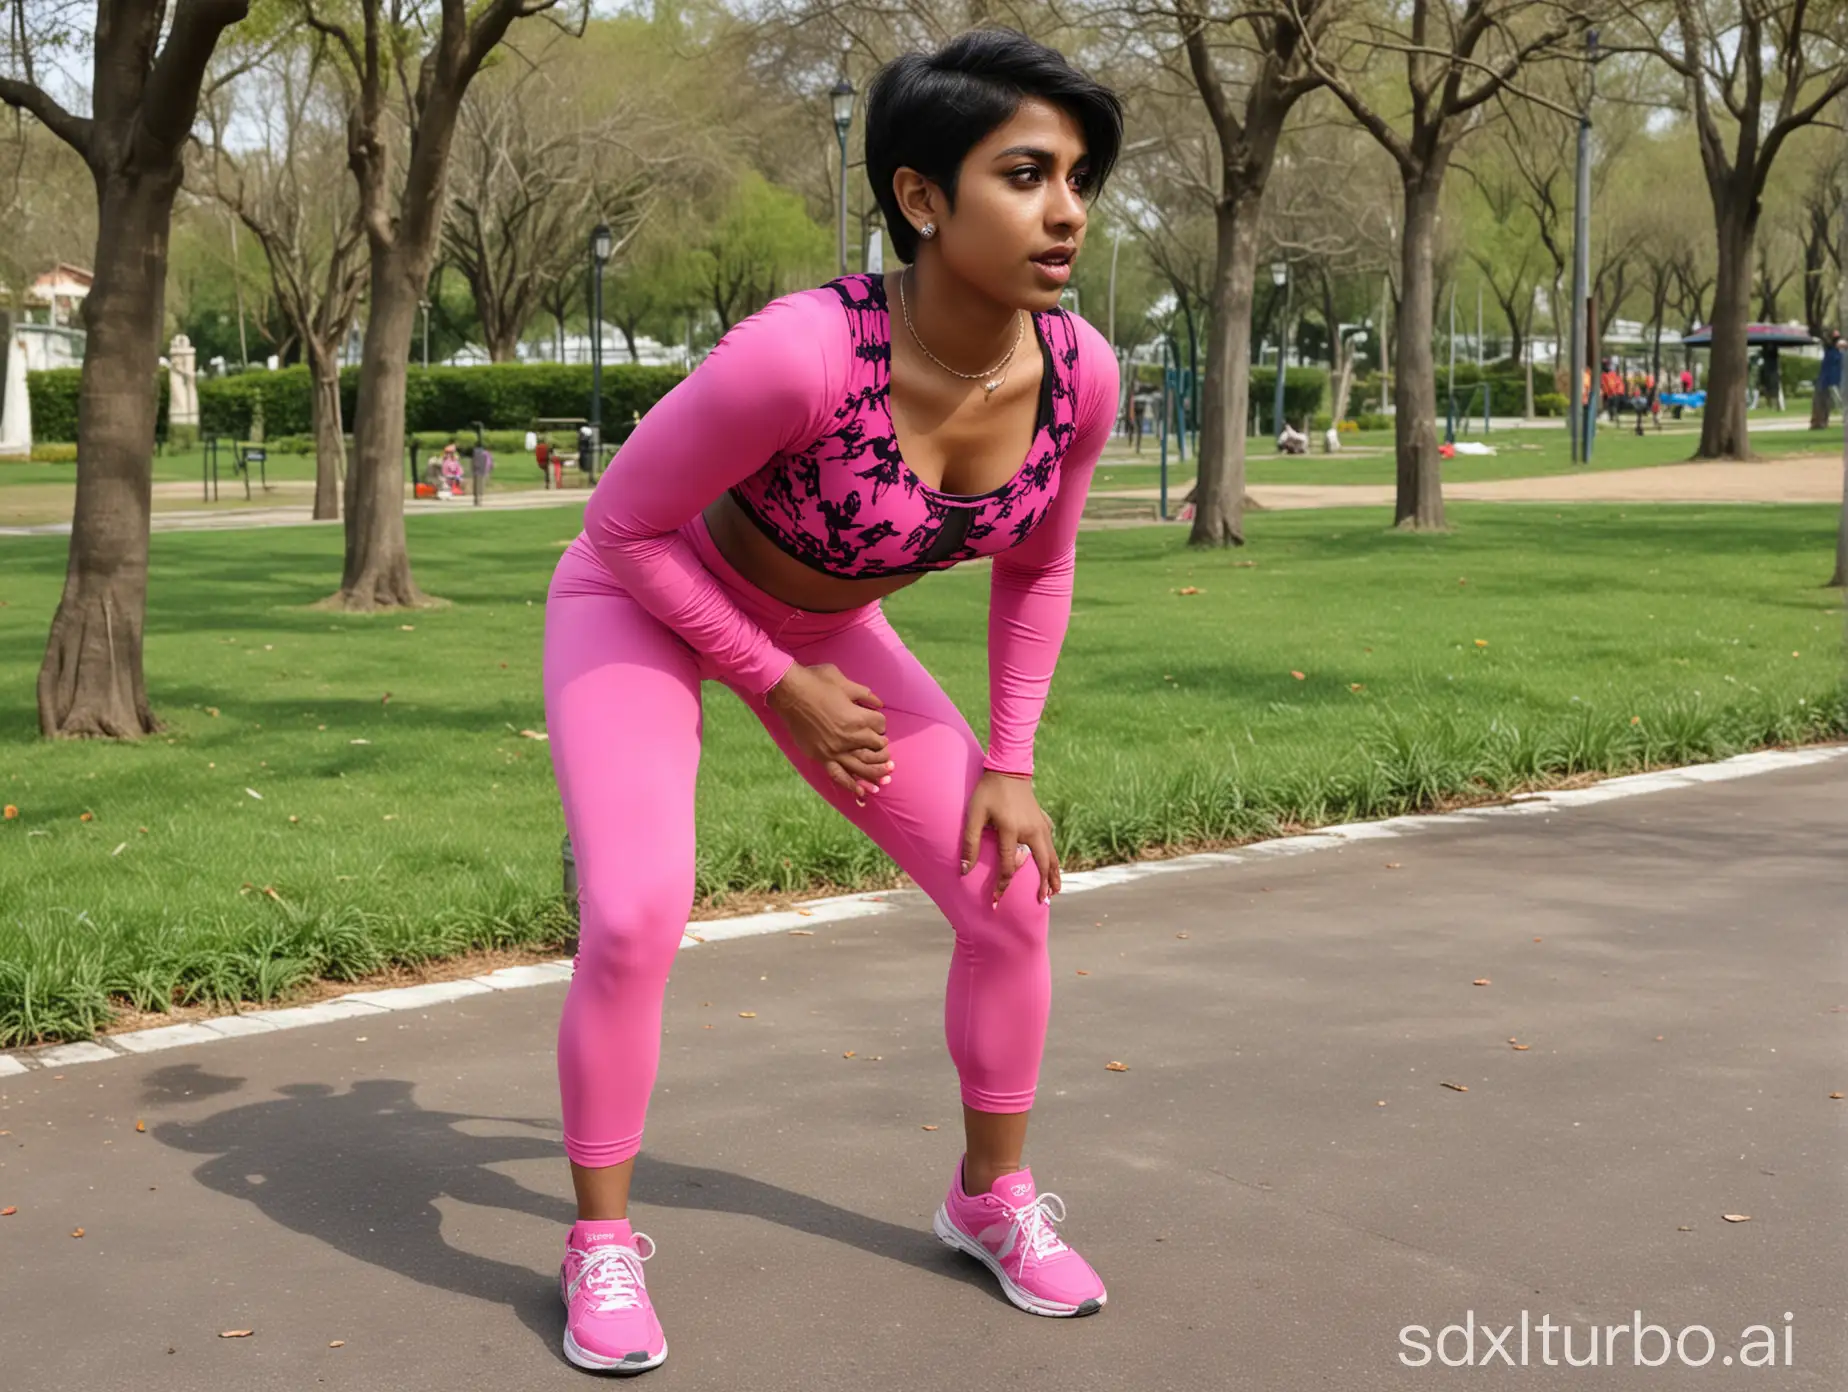 south indian, 30s, femboy, short hair, sissy, cross dresser ,chastity cage , big butt,  sports bra, tight leggings, pink outfit, crowded public park, back view , doing squats